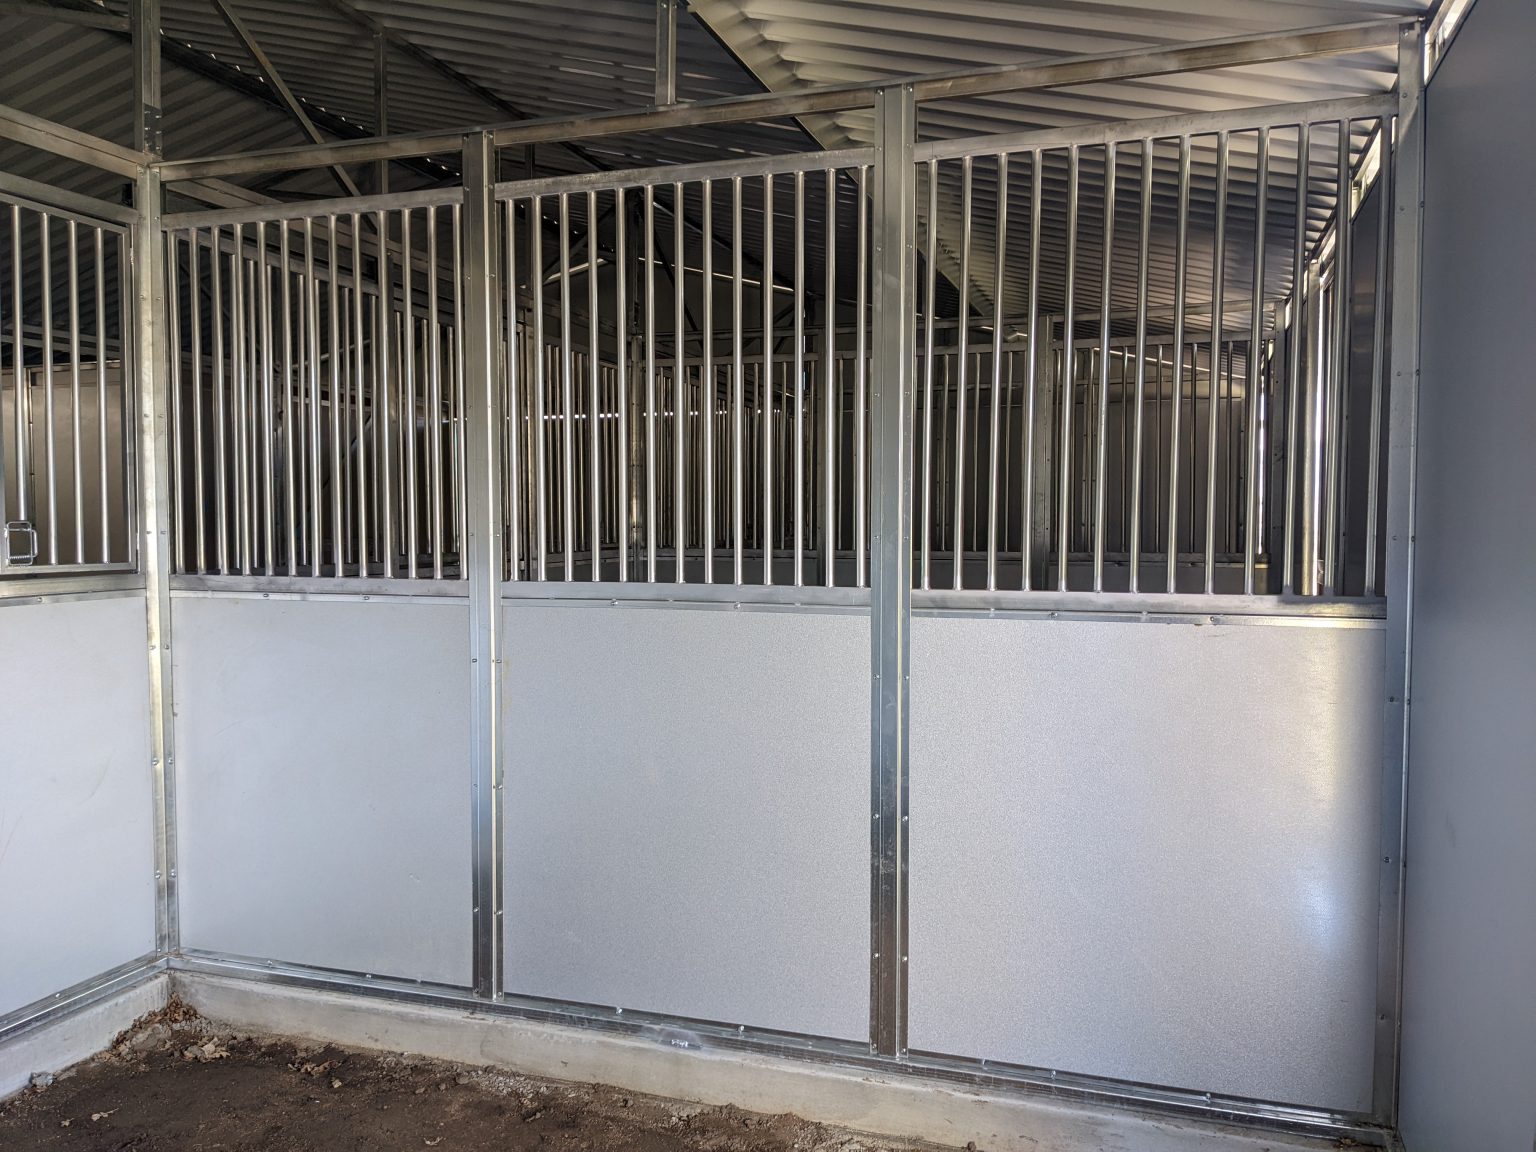 4X4 Grills in stall divider walls